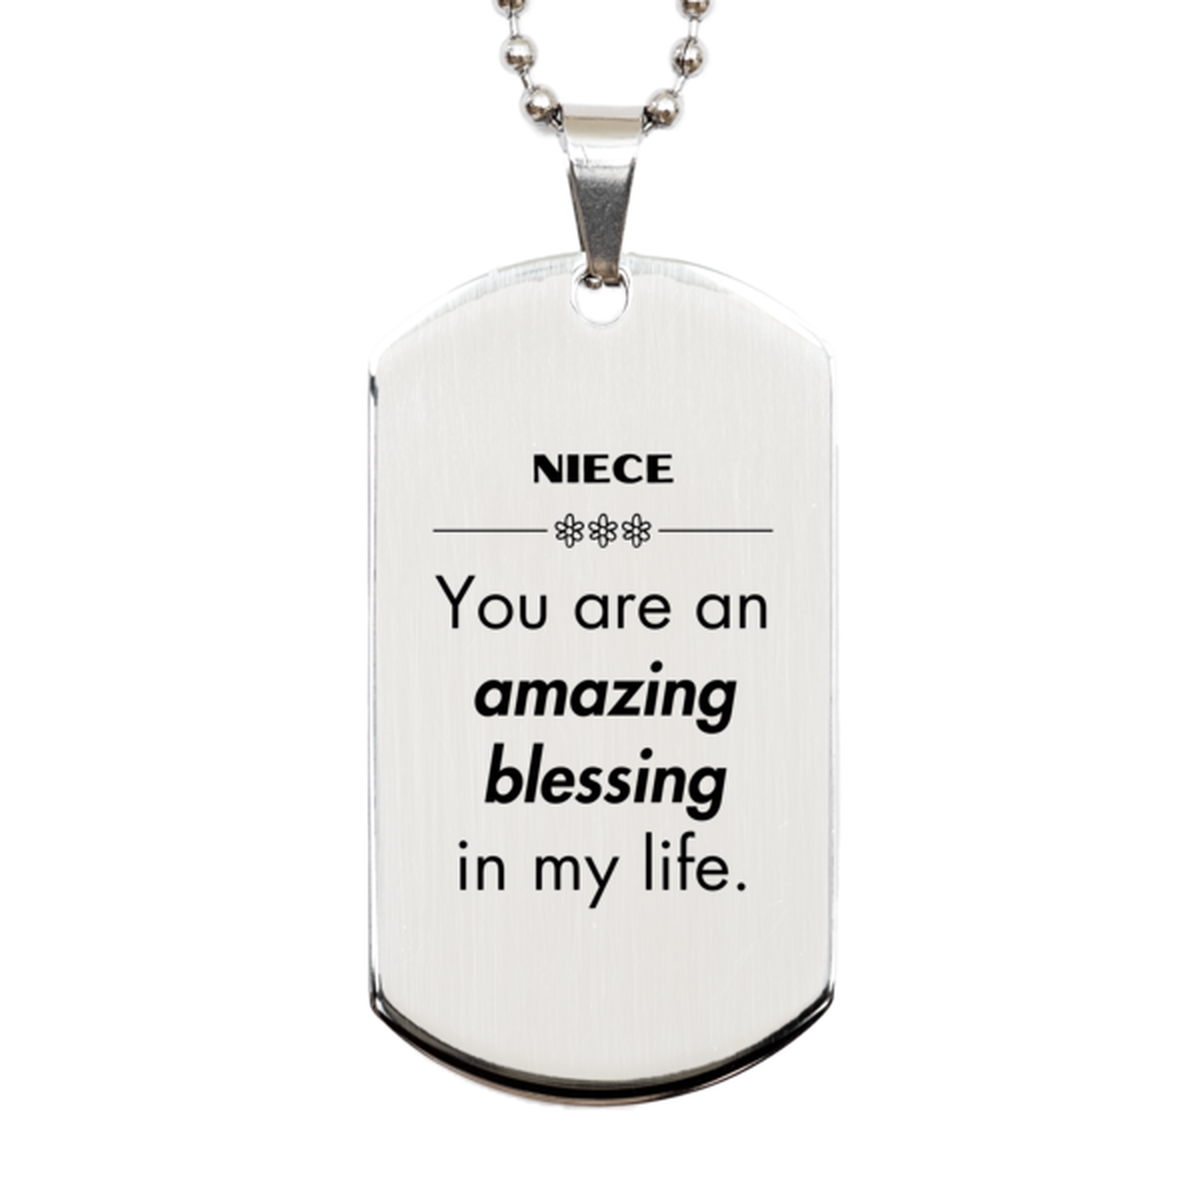 Niece Silver Dog Tag, You are an amazing blessing in my life, Thank You Gifts For Niece, Inspirational Birthday Christmas Unique Gifts For Niece